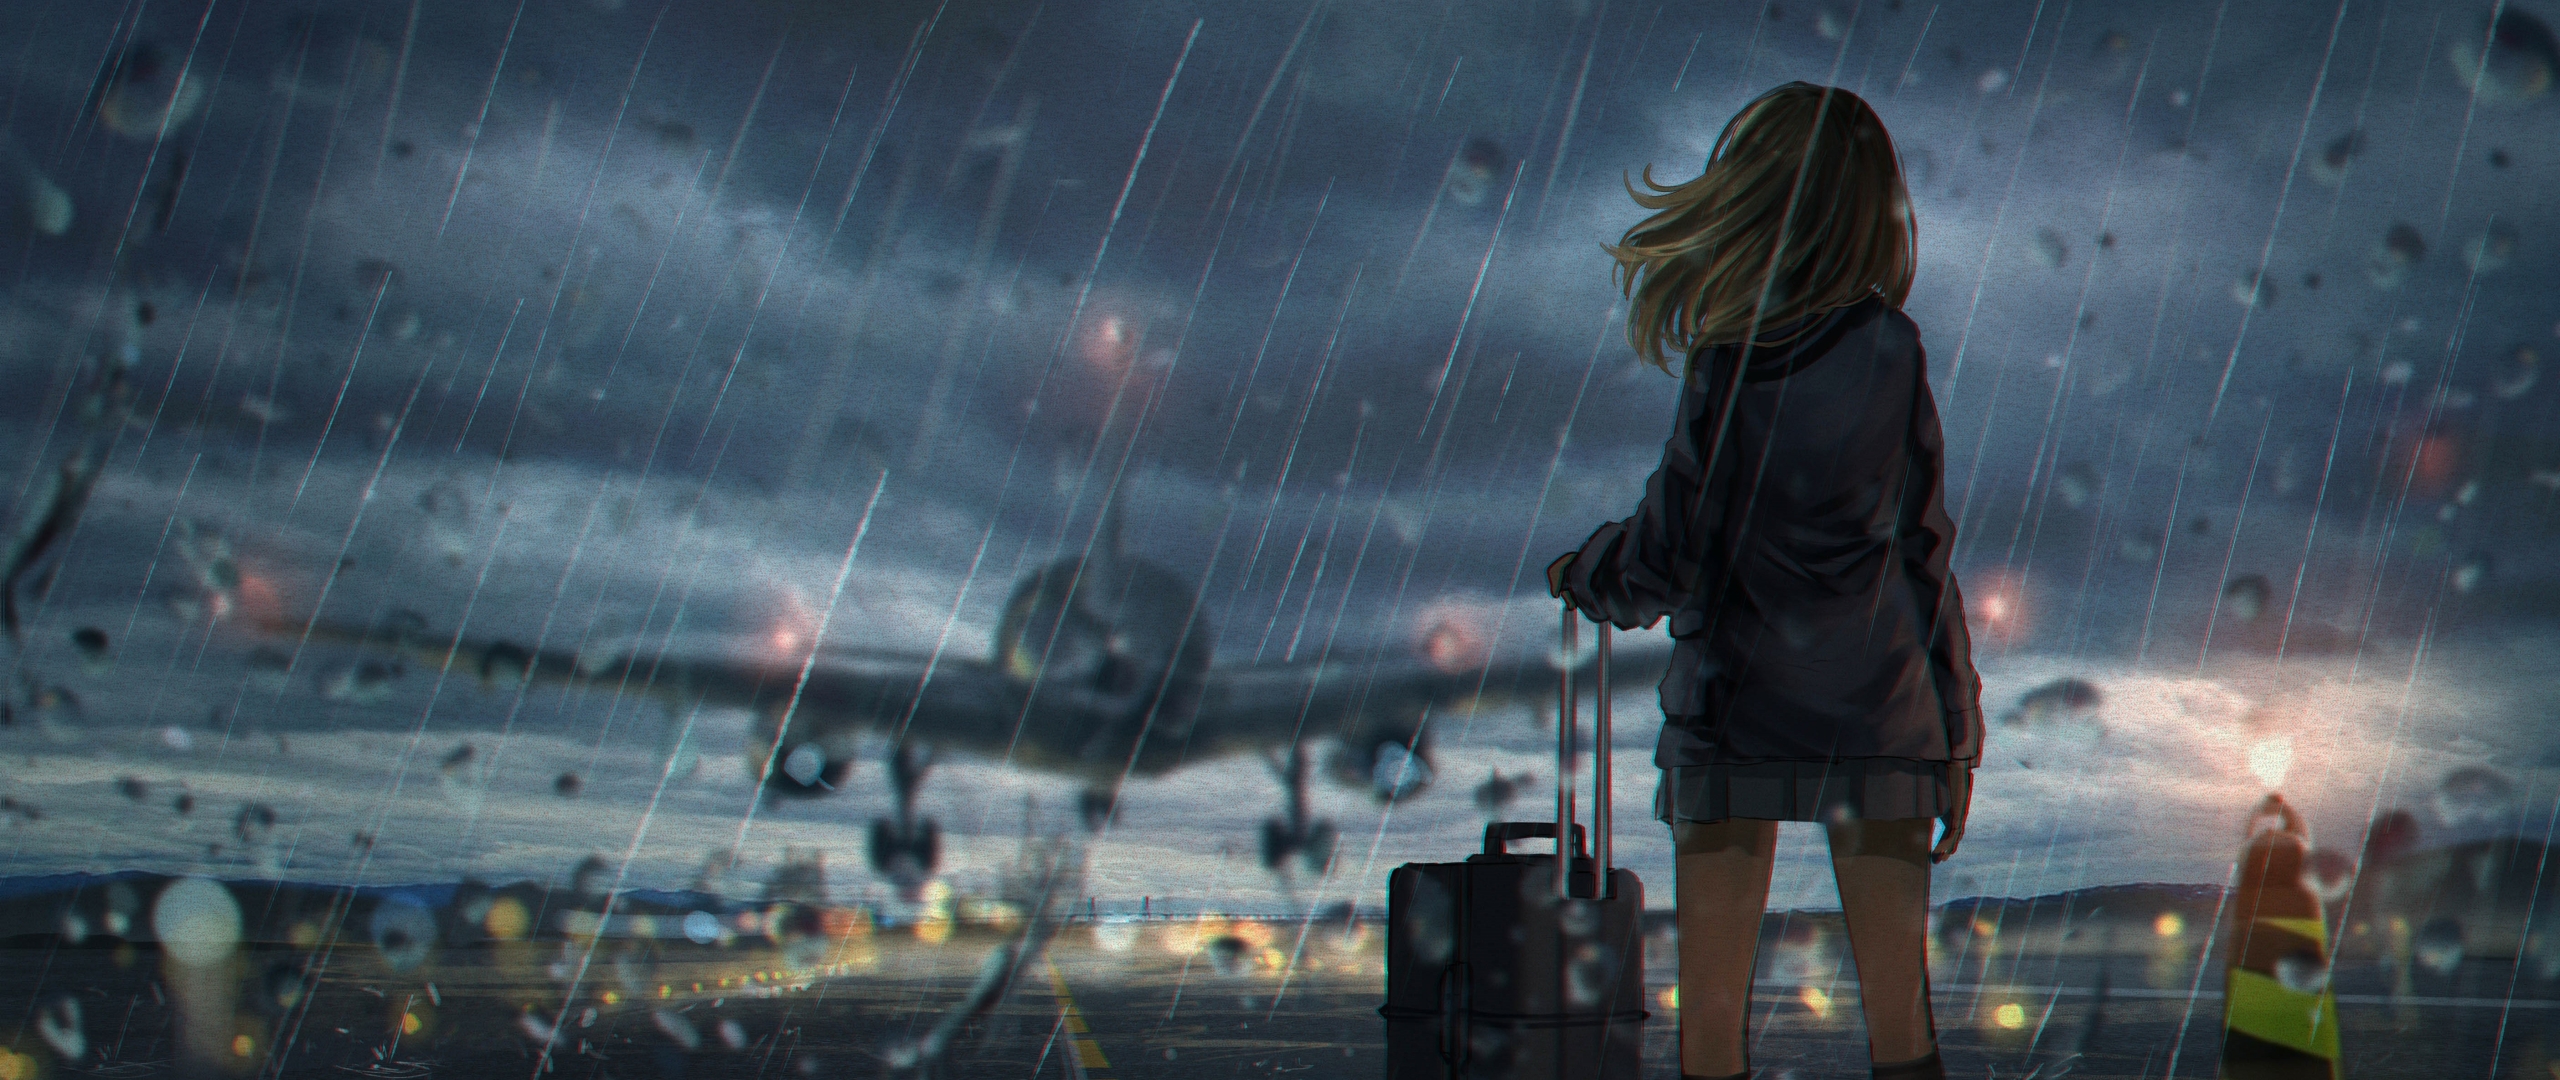 2560x1080 Alone in Airport 4K Rain 2560x1080 Resolution Wallpaper, HD  Artist 4K Wallpapers, Images, Photos and Background - Wallpapers Den